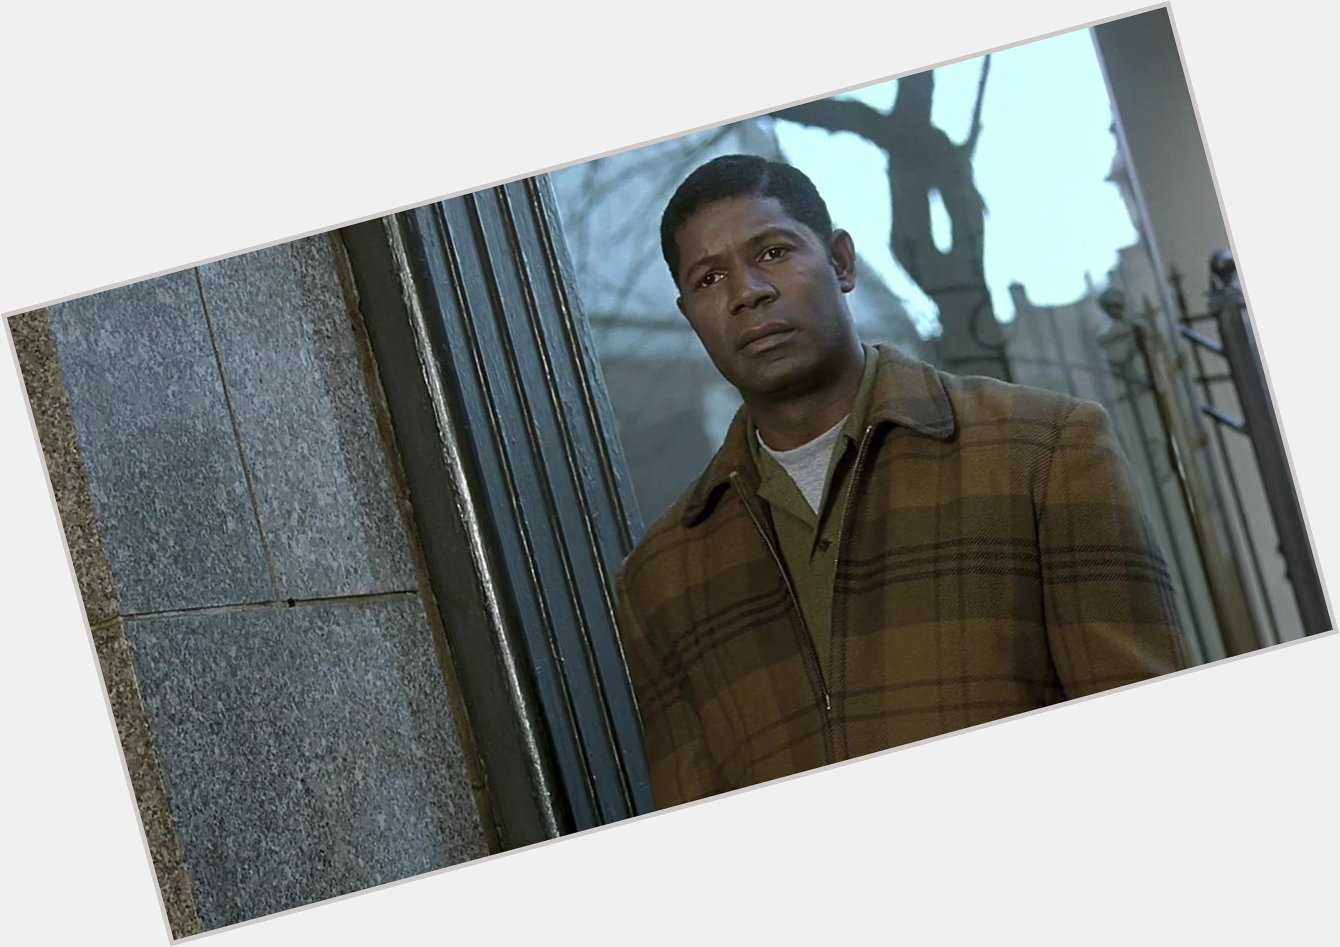 Happy birthday Dennis Haysbert, whom I liked very much in Far from heaven. 